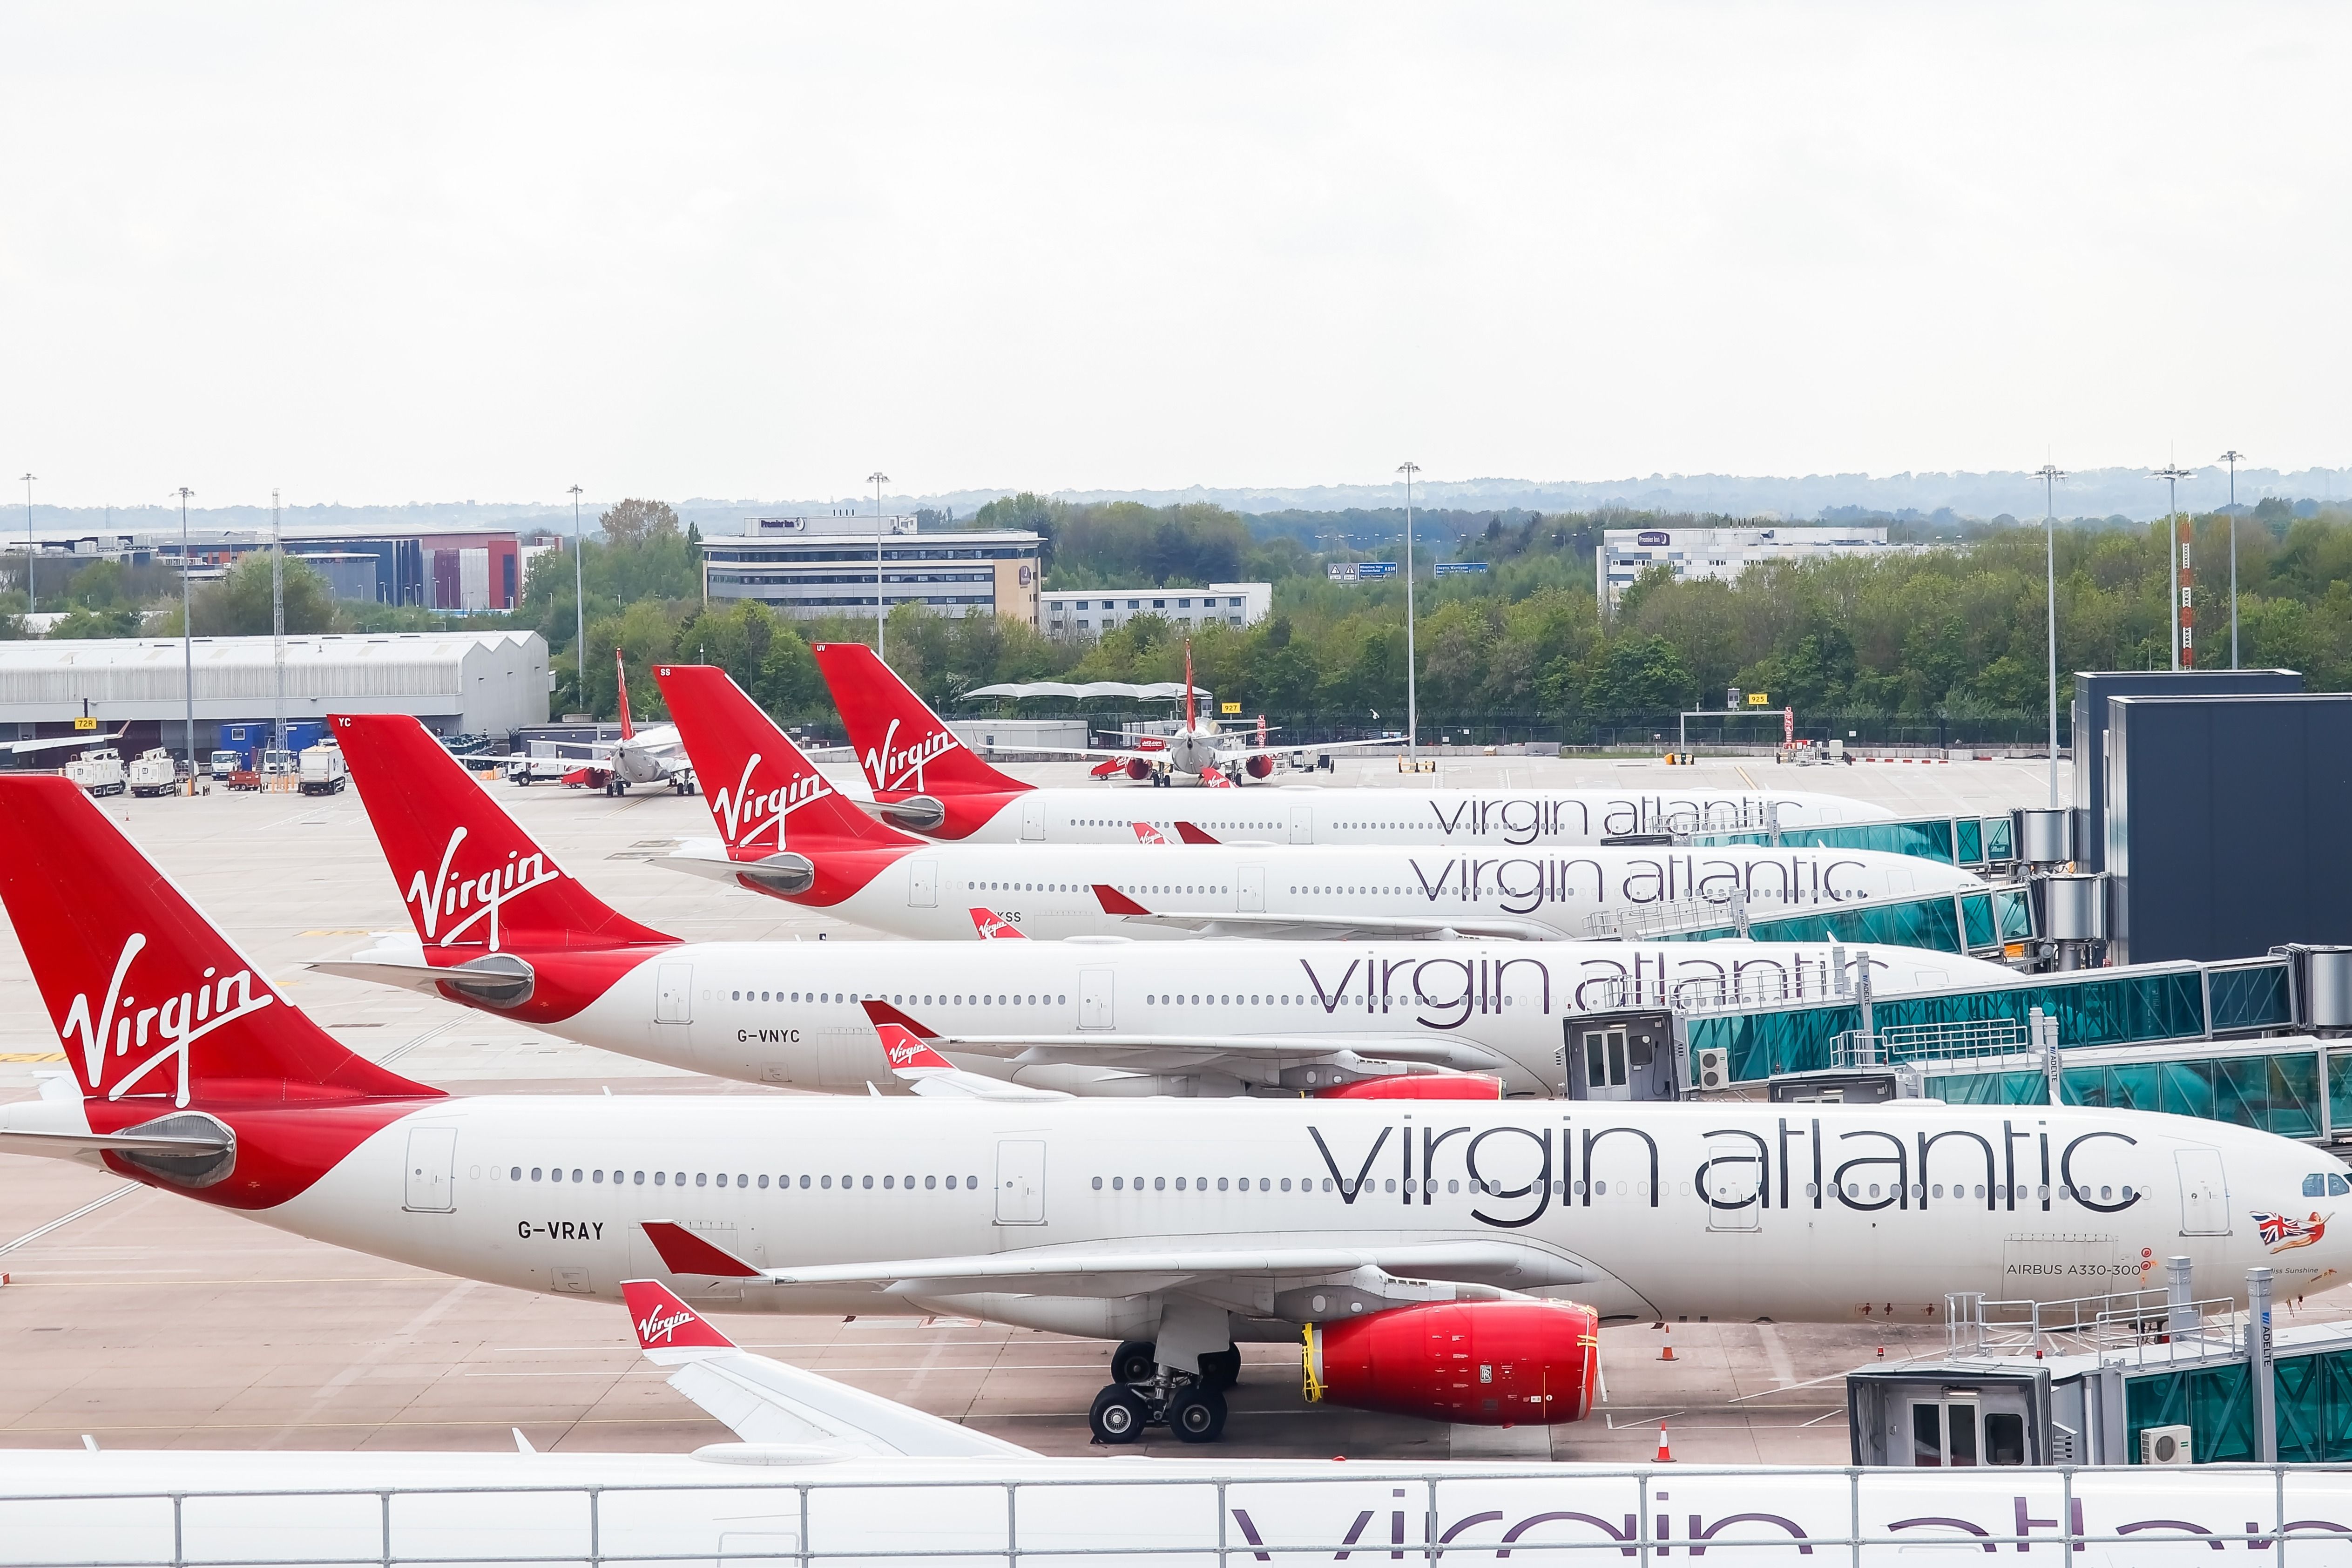 Several Virgin Atlantic Airbus aircraft parked side by side at an airport.